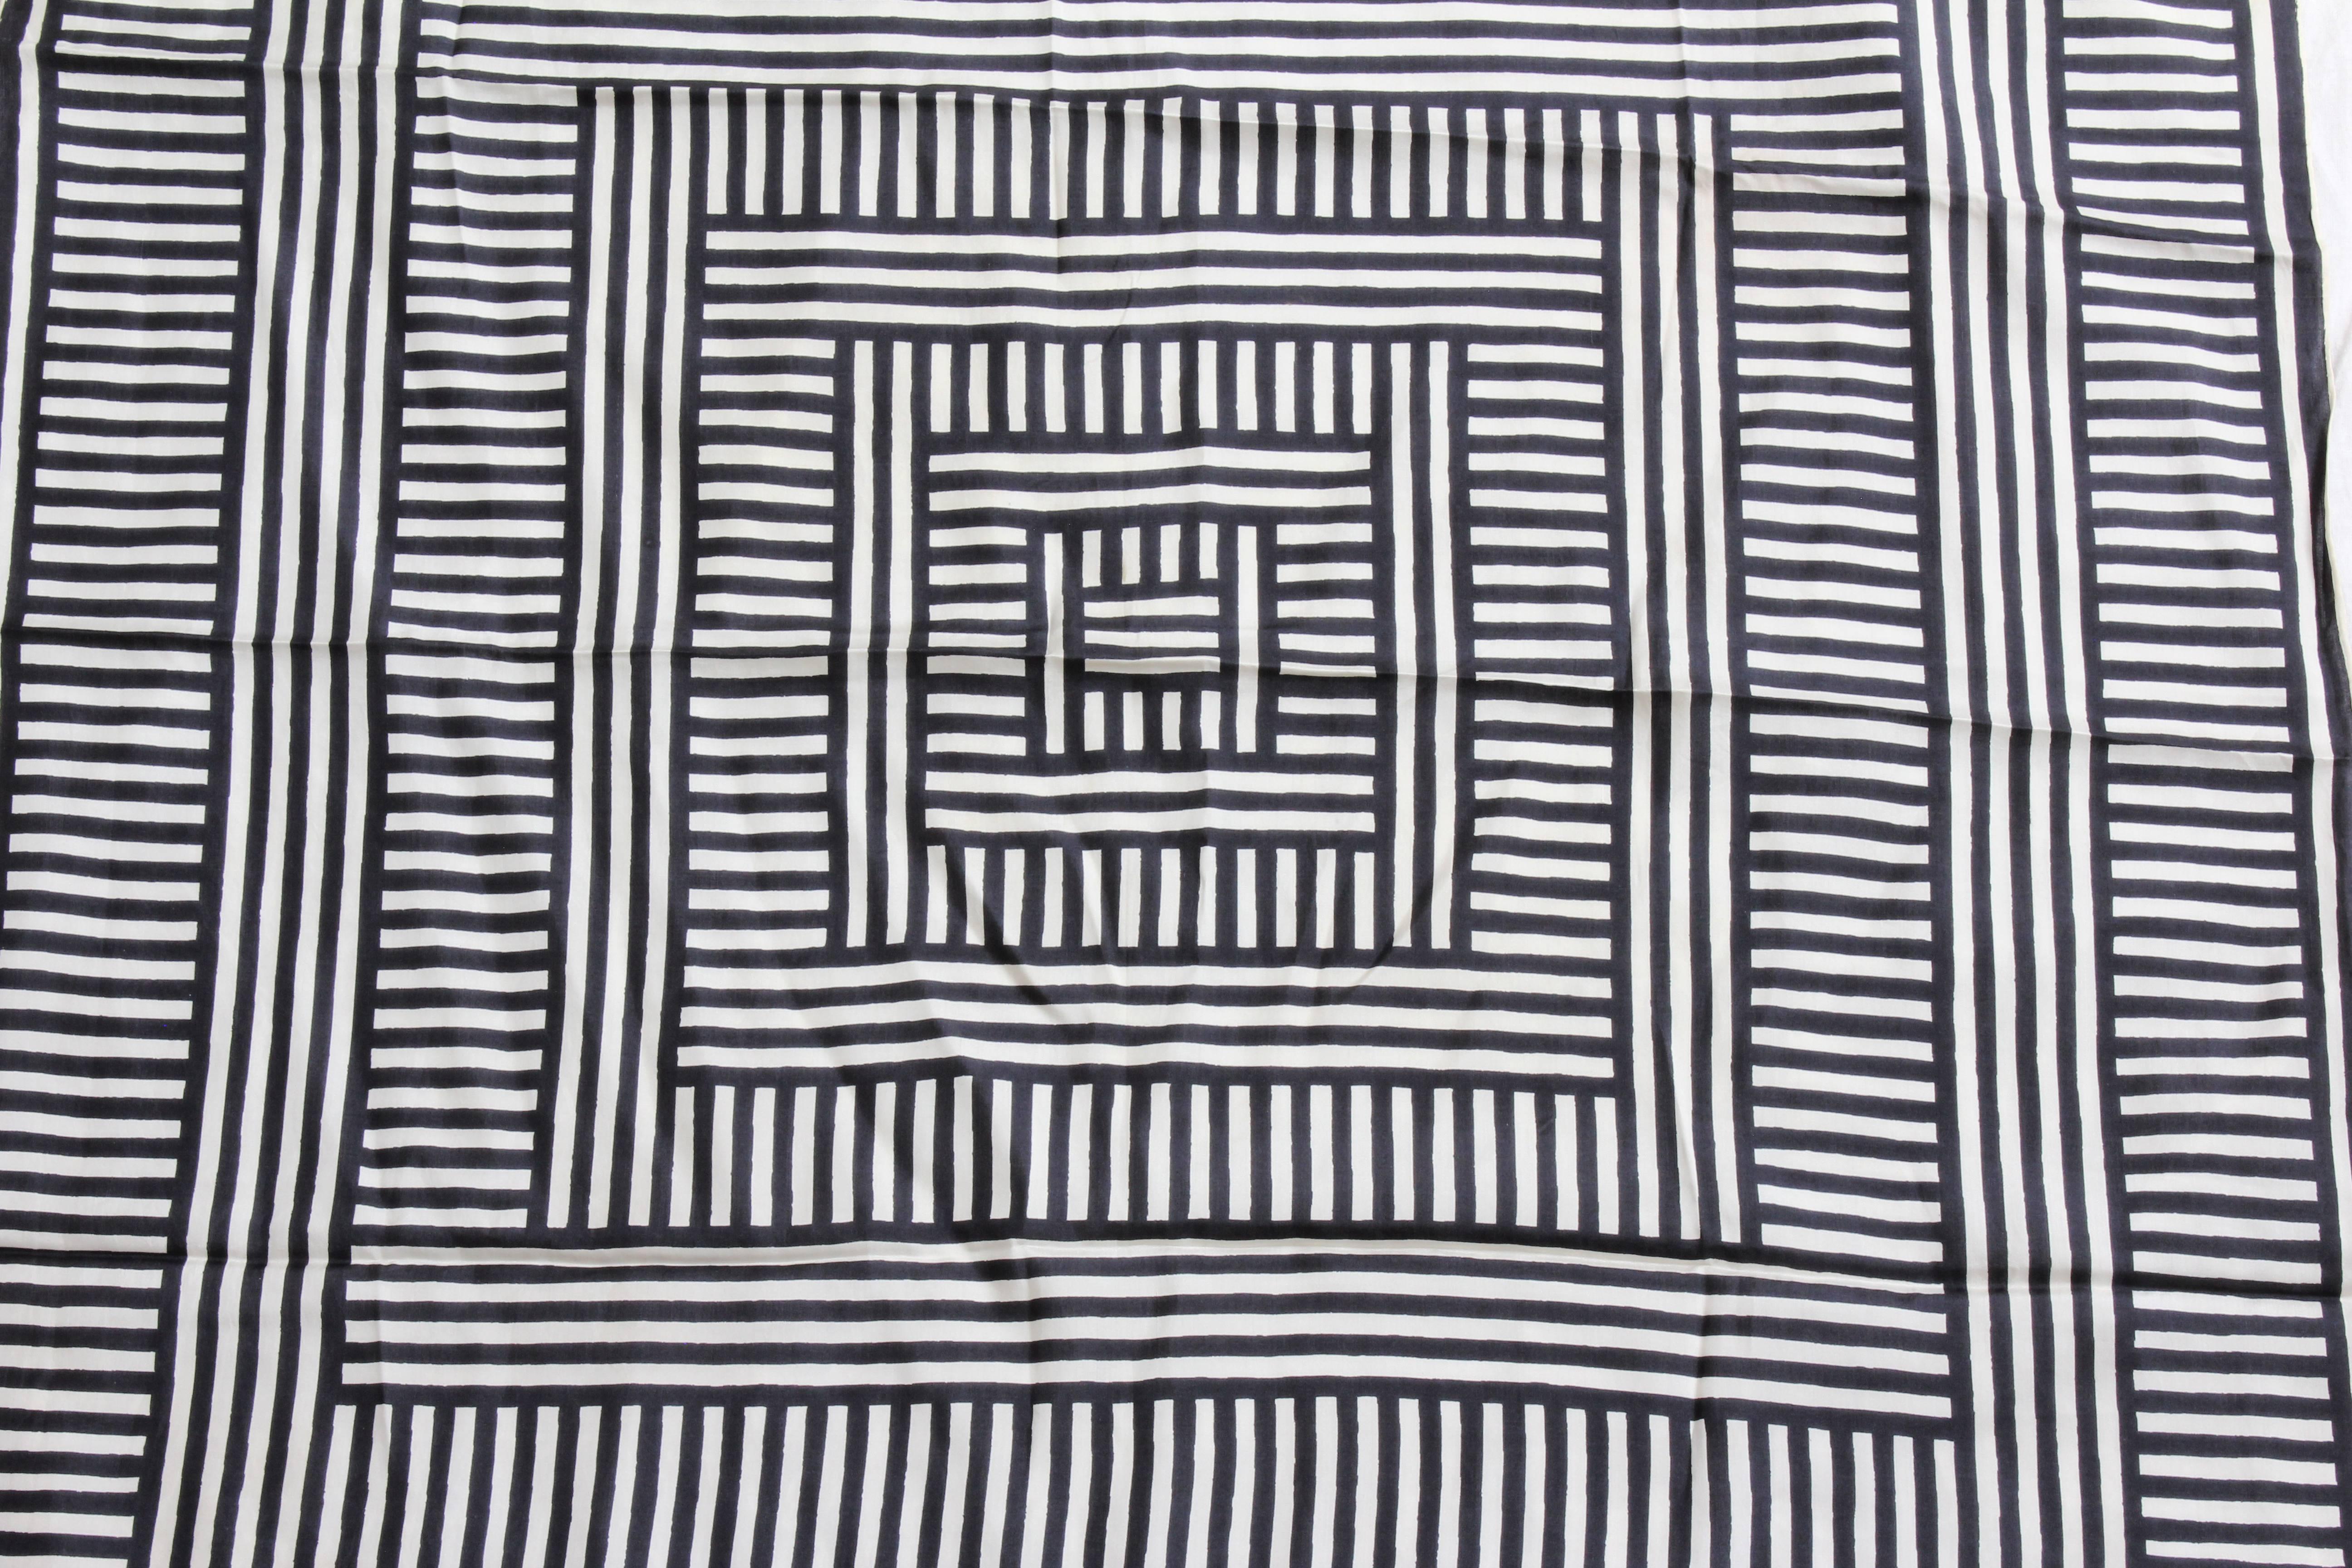 This unusual op art scarf or shawl was made by VERA, aka Vera Neumann, most likely in the late 1970s.  Made from silk, it features a black and white optical design and is signed by Vera with her signature lady bug logo.  It measures appx 31in